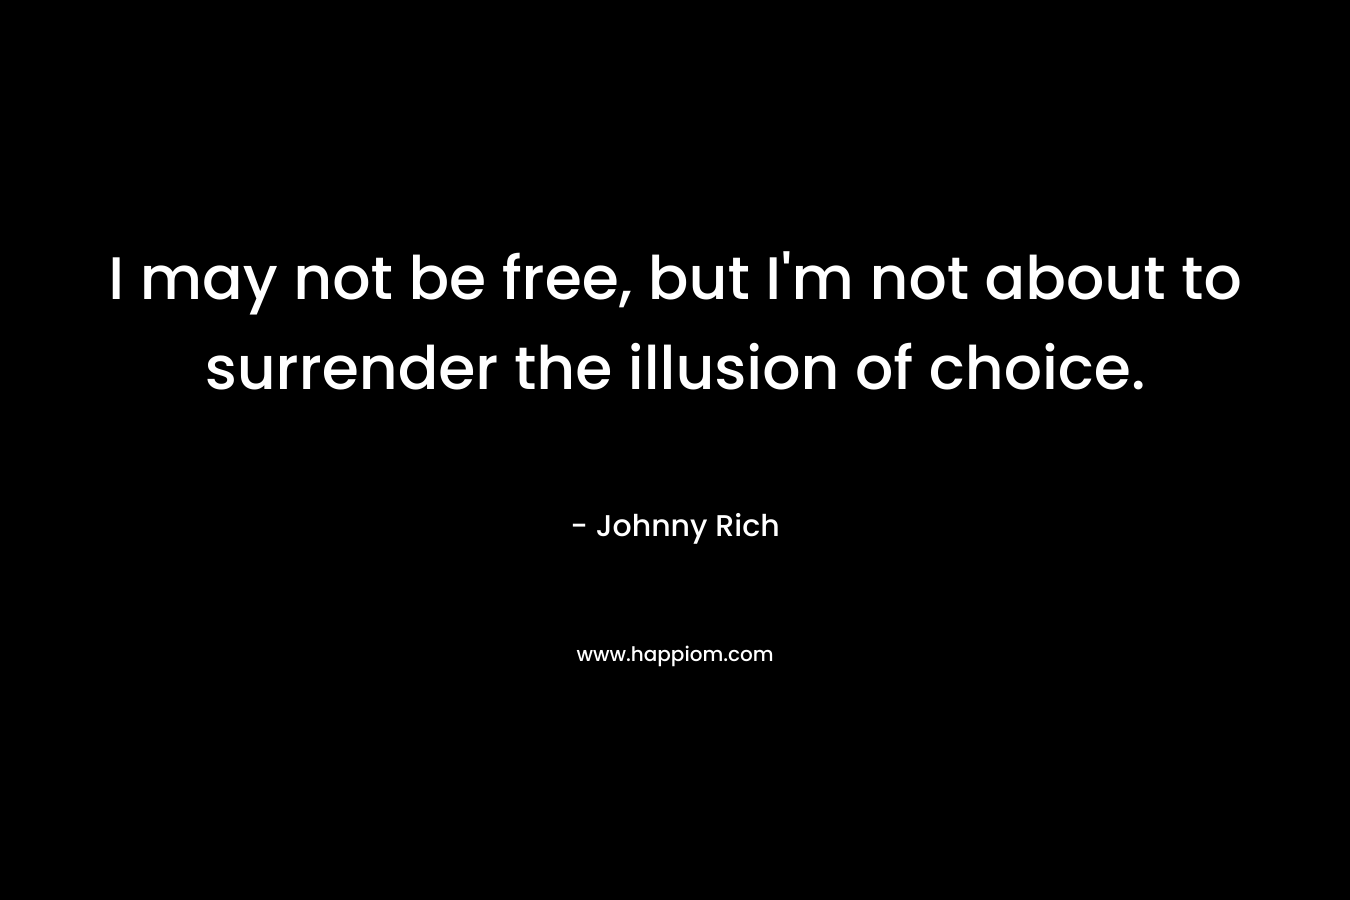 I may not be free, but I'm not about to surrender the illusion of choice.